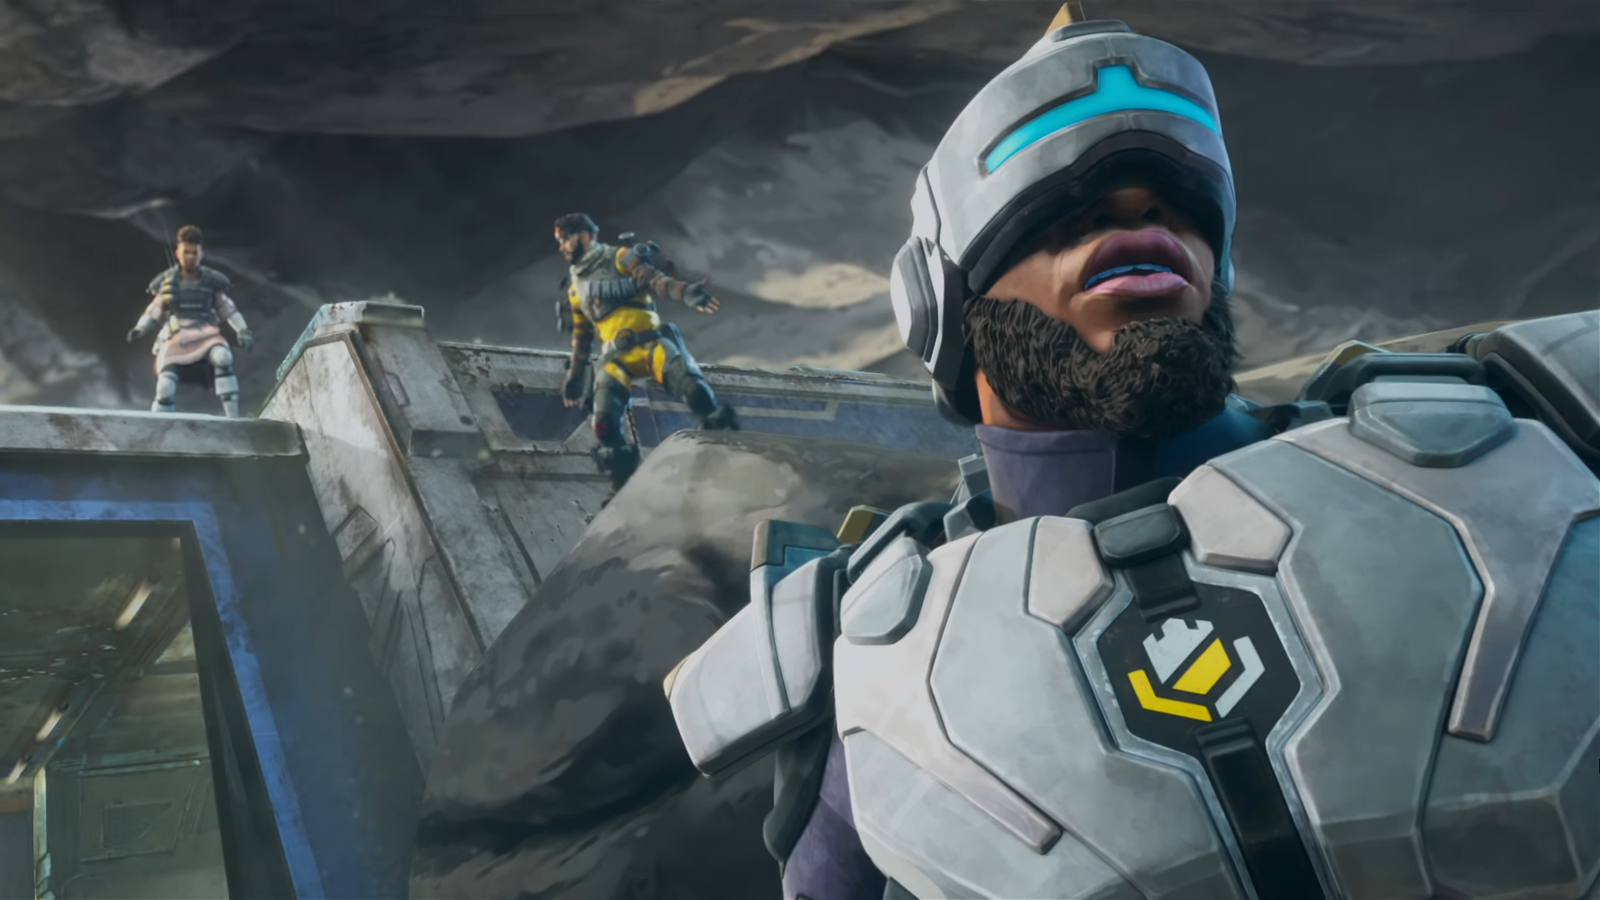 Apex Legends' latest character Ballistic is an old dog showing off